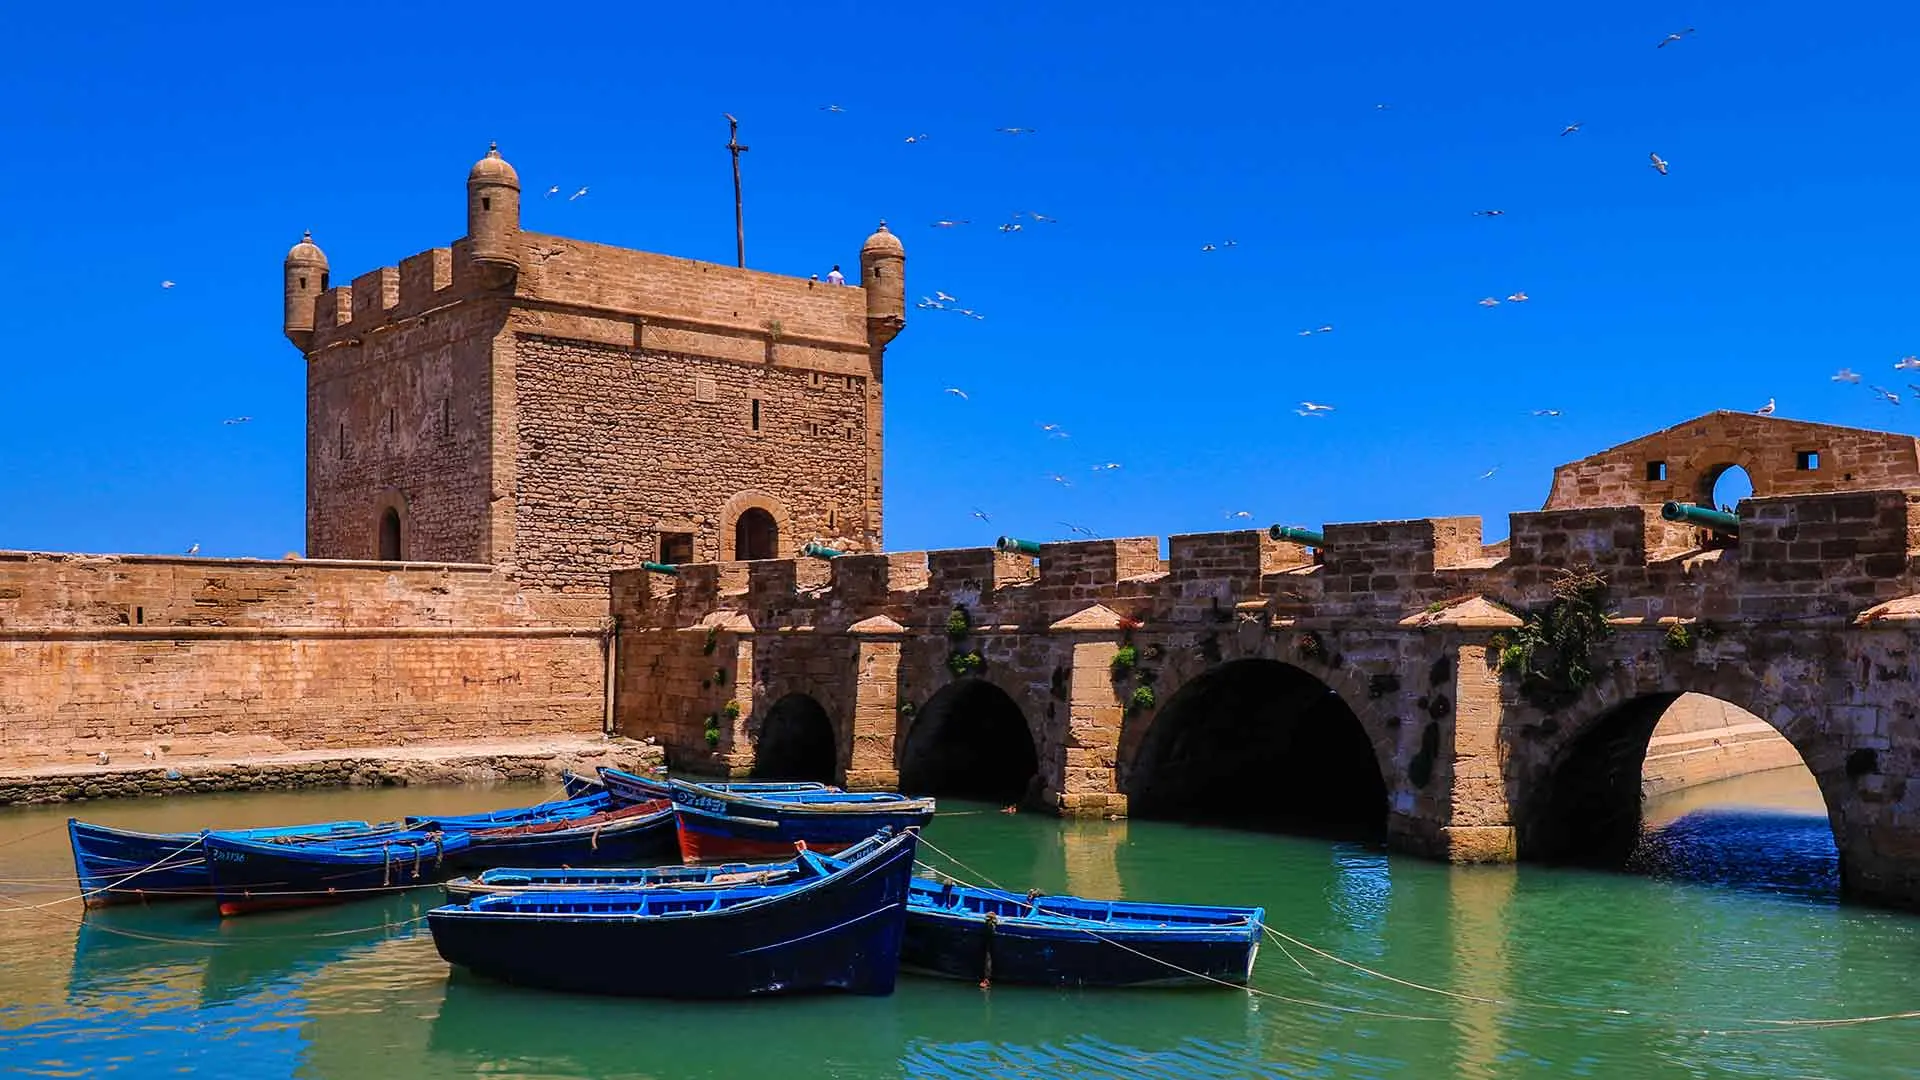 Excursion to Essaouira from Marrakech takes place in Marrakech and we will arrange a meeting location, typically at your accommodation entrance. It's recommended to meet at 7:30 in the morning to make the most of the experience, but we can adjust the time to suit the group's needs.